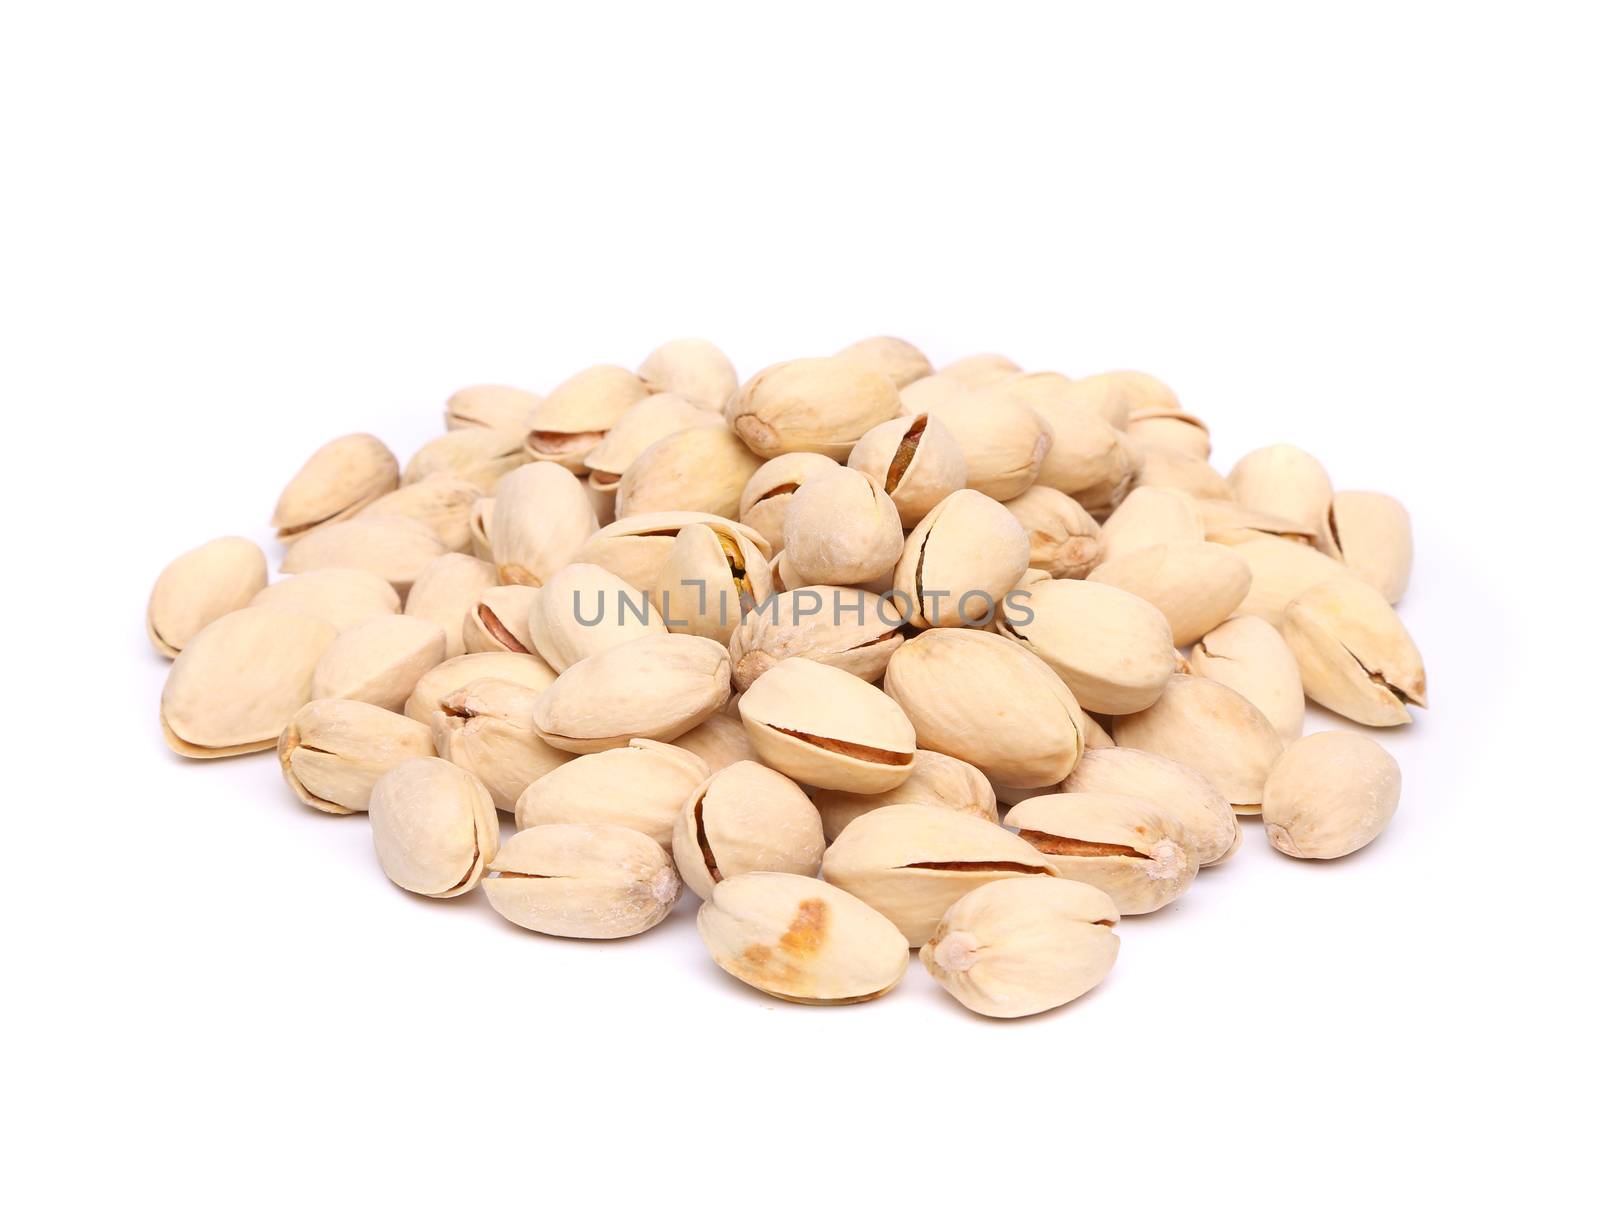 A pistachios heap on the white background close-up